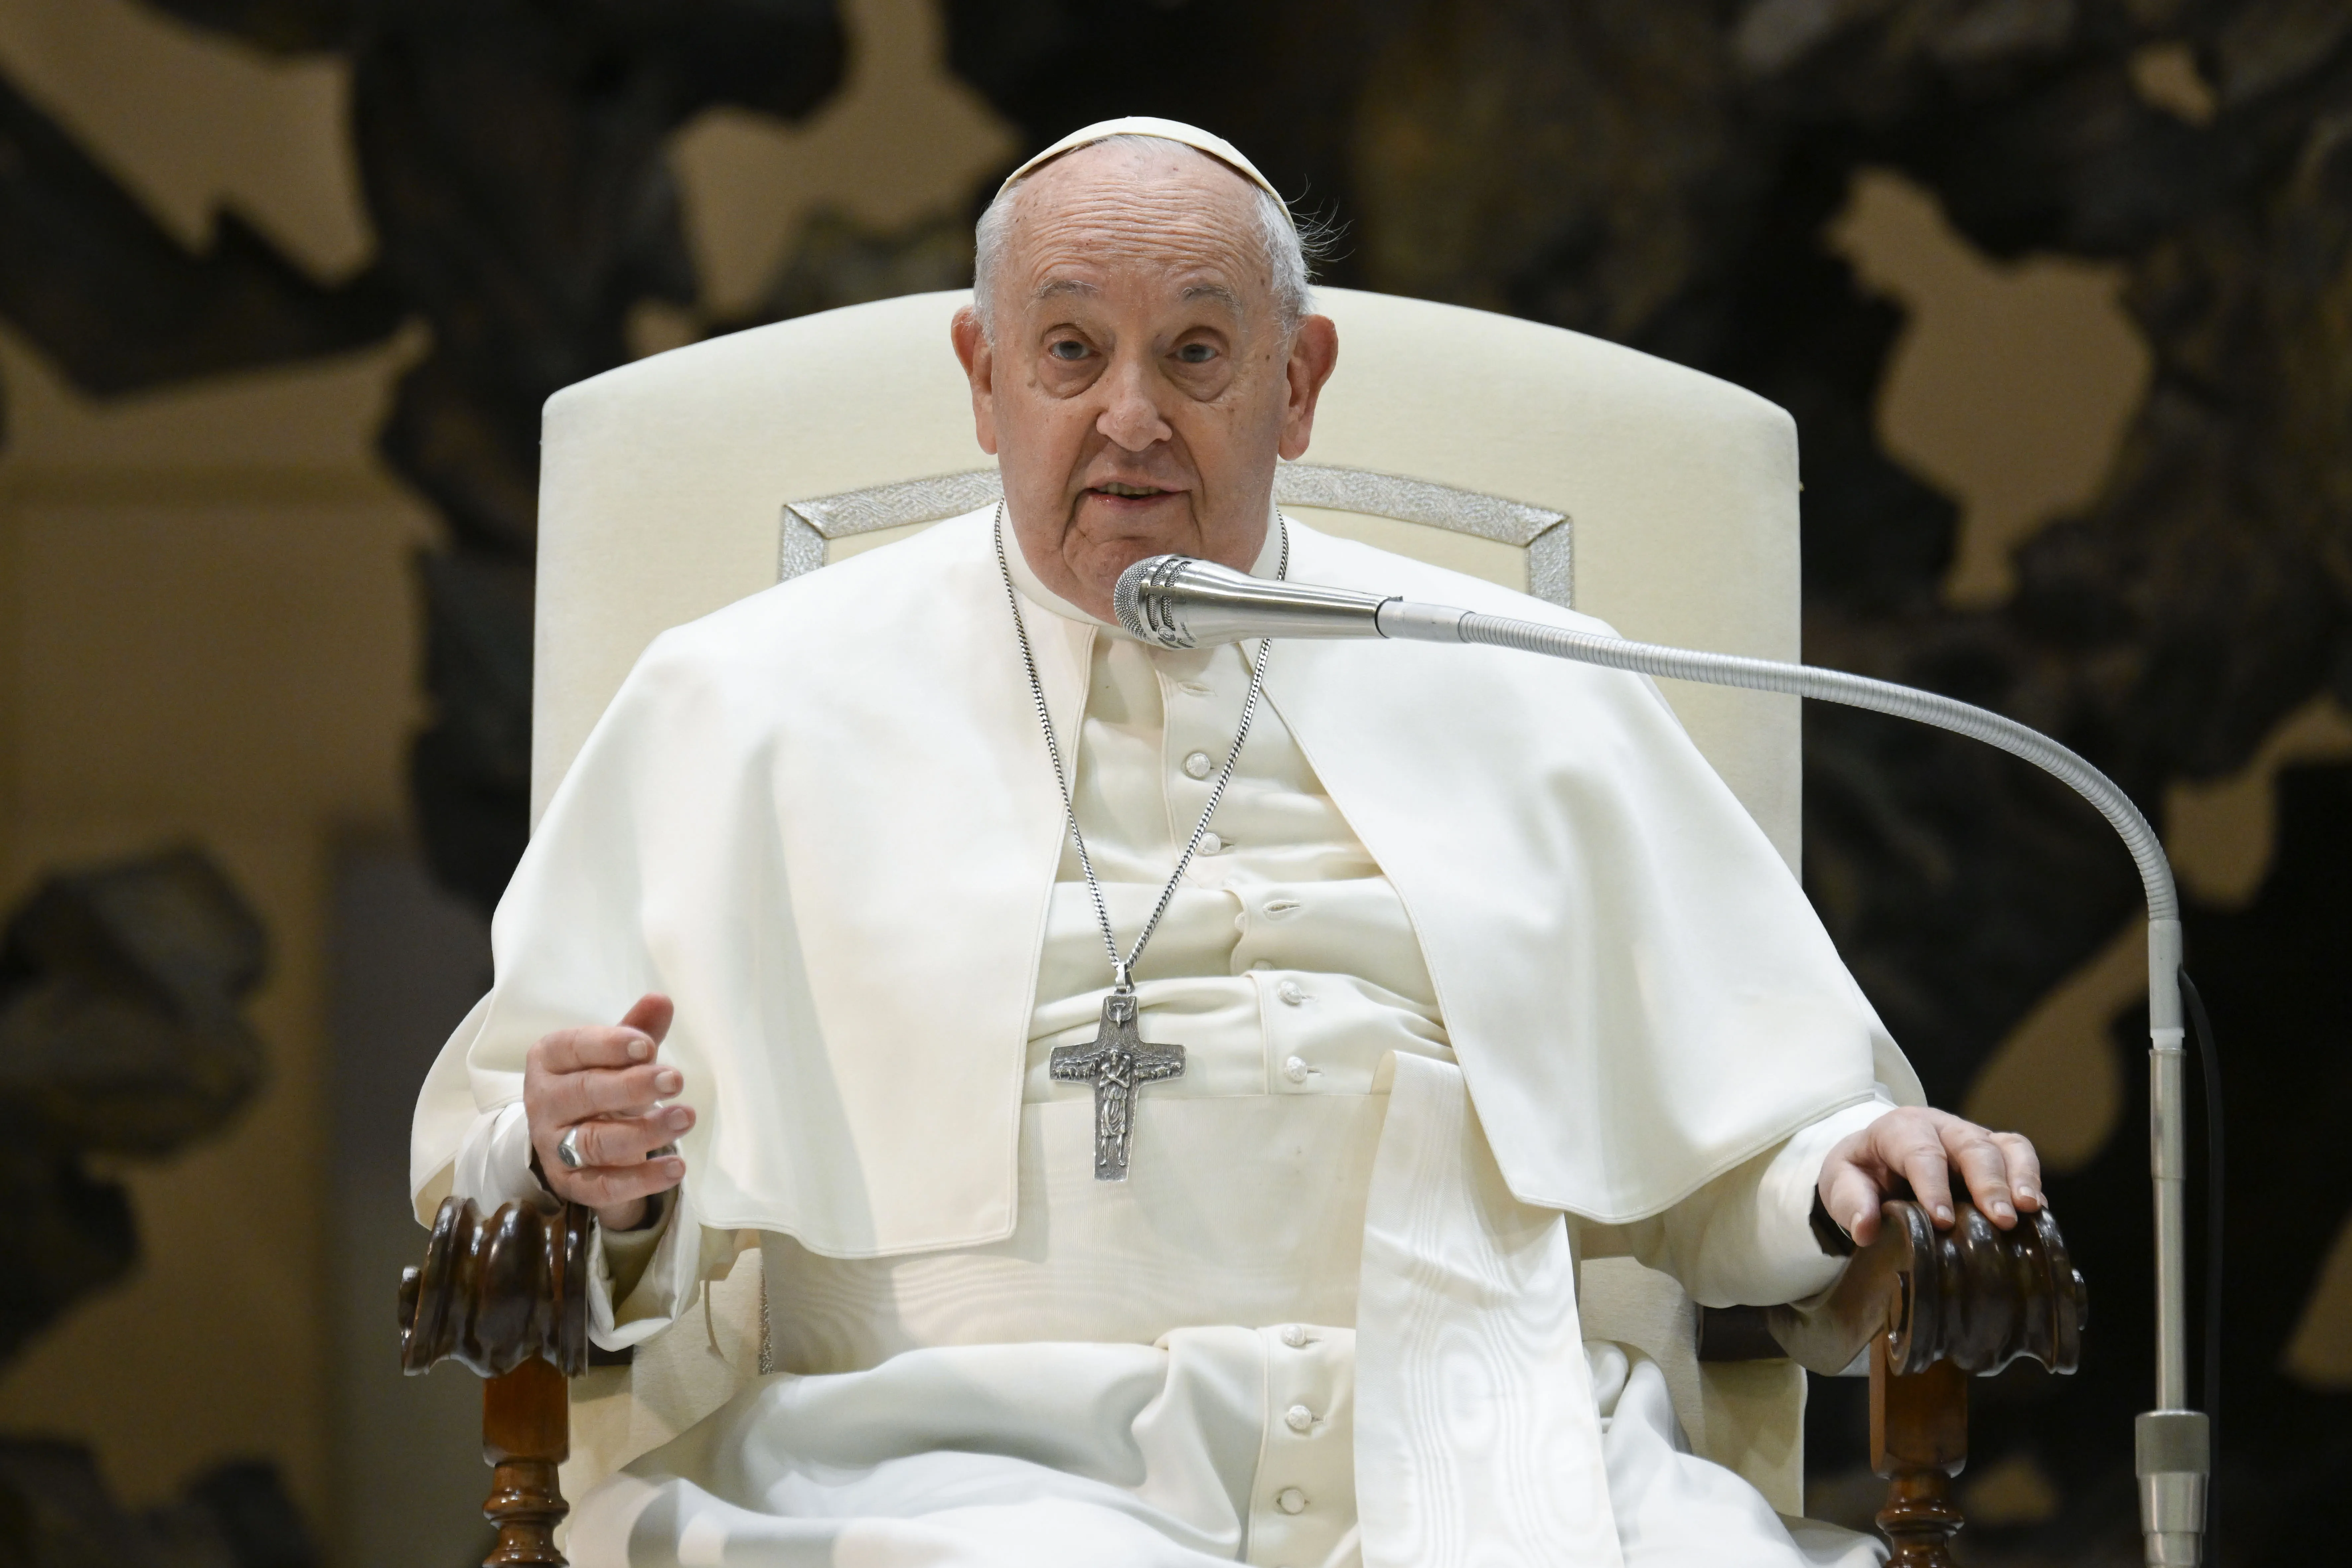 Pope Francis’ message for World Day of Prayer for Vocations stresses fraternity, hope